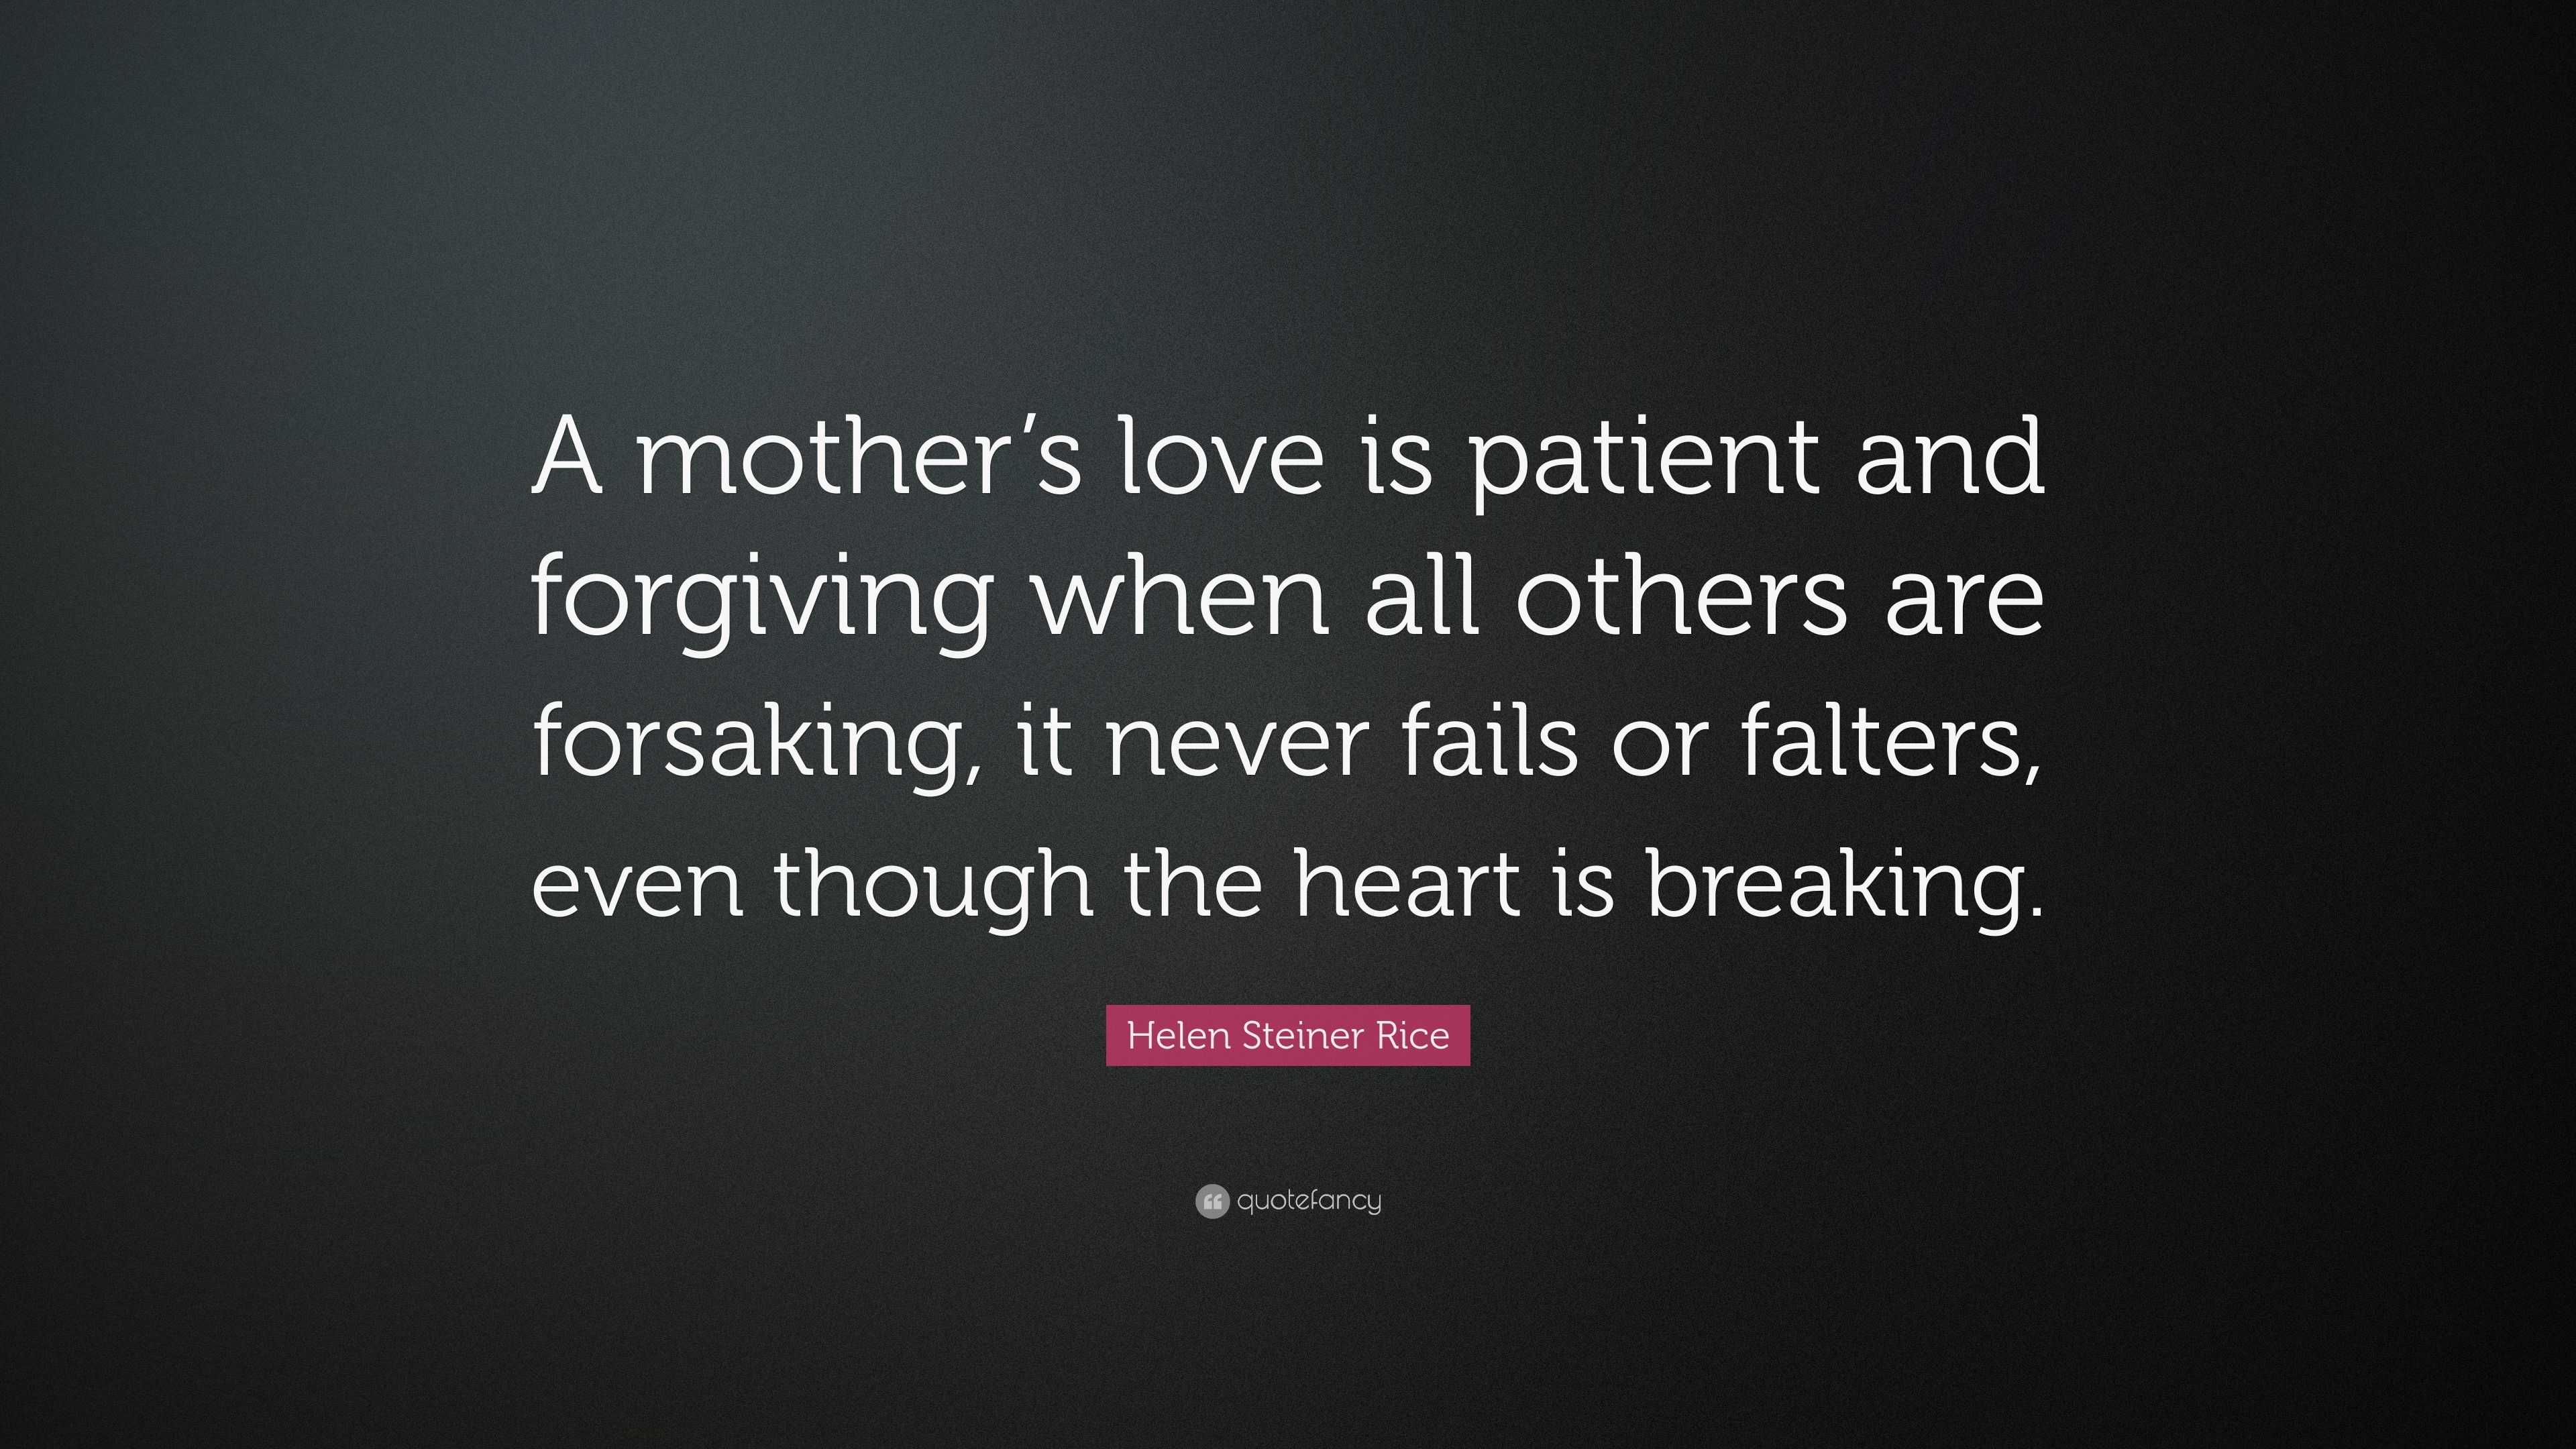 Helen Steiner Rice Quote: “A mother’s love is patient and forgiving ...